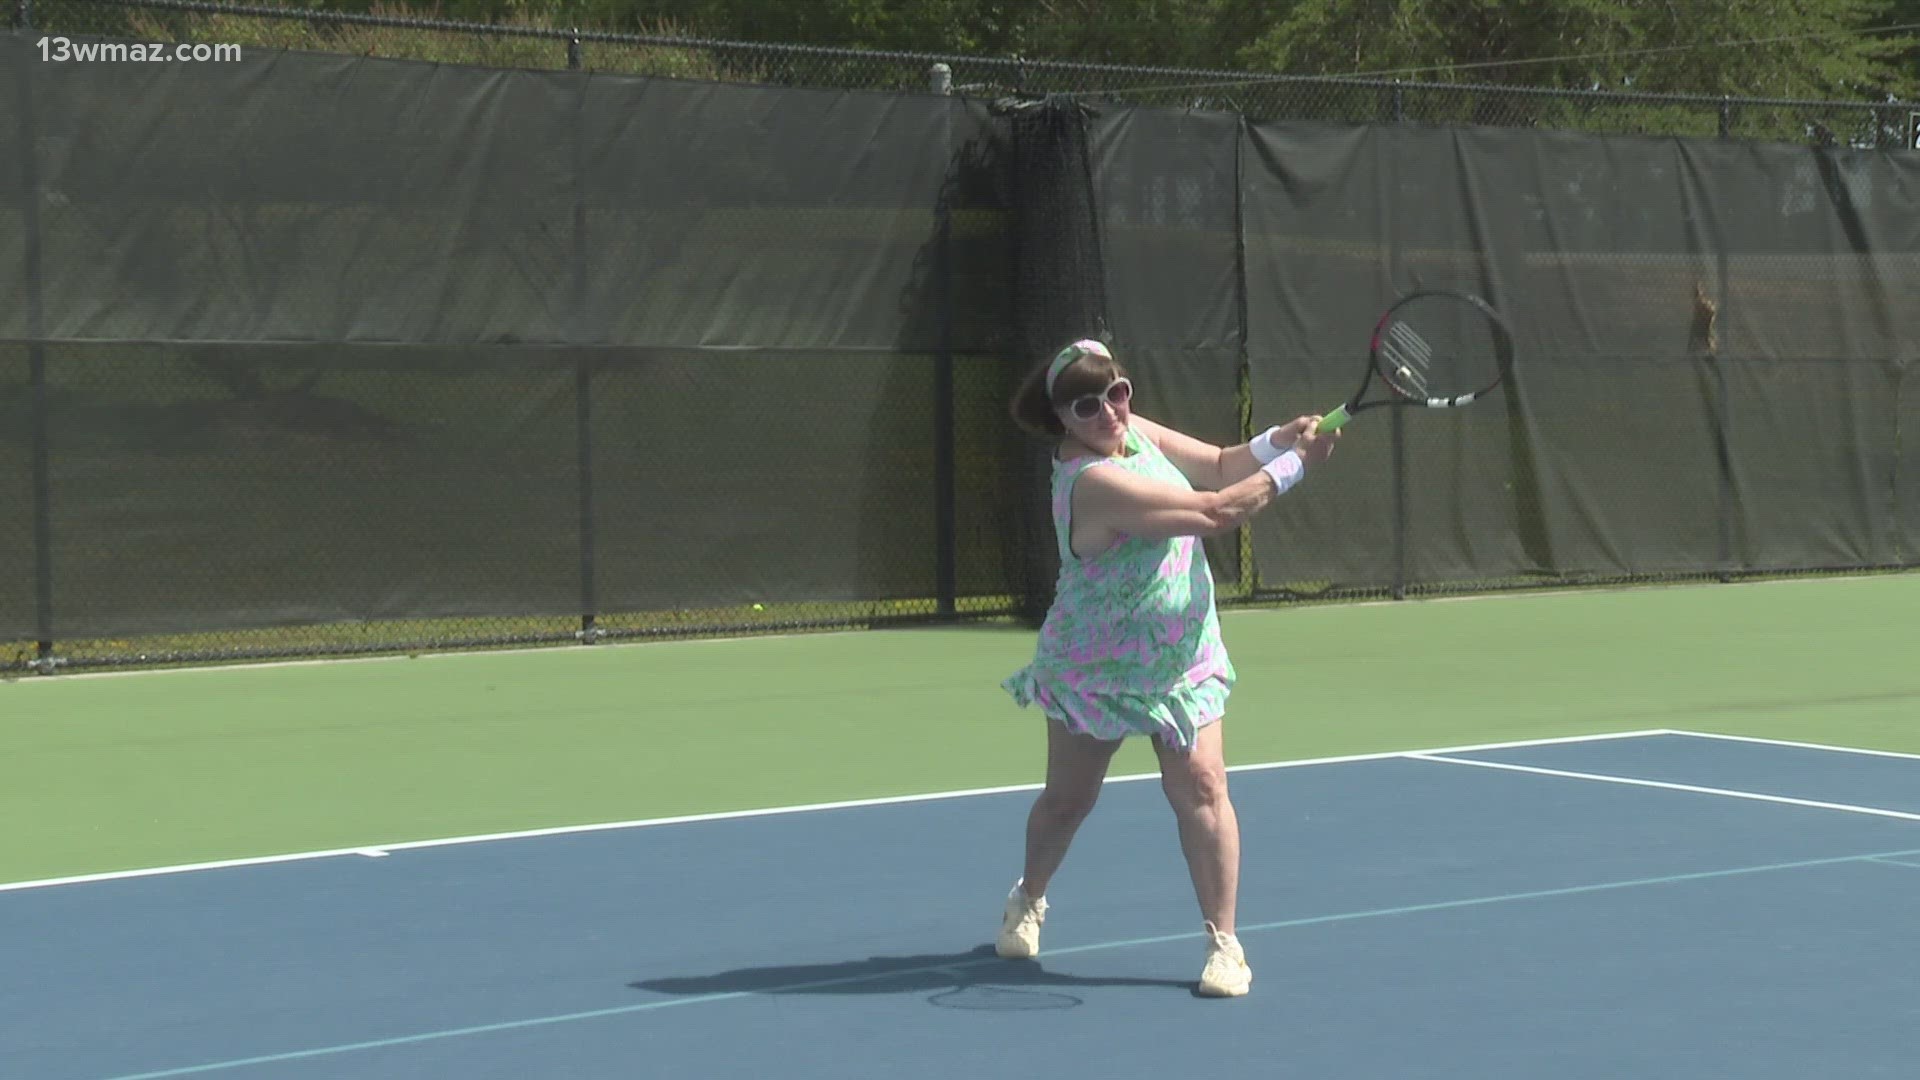 The United States Tennis Association and the Georgia Academy for the Blind will host a workshop to teach blind and visually impaired people how to play tennis.